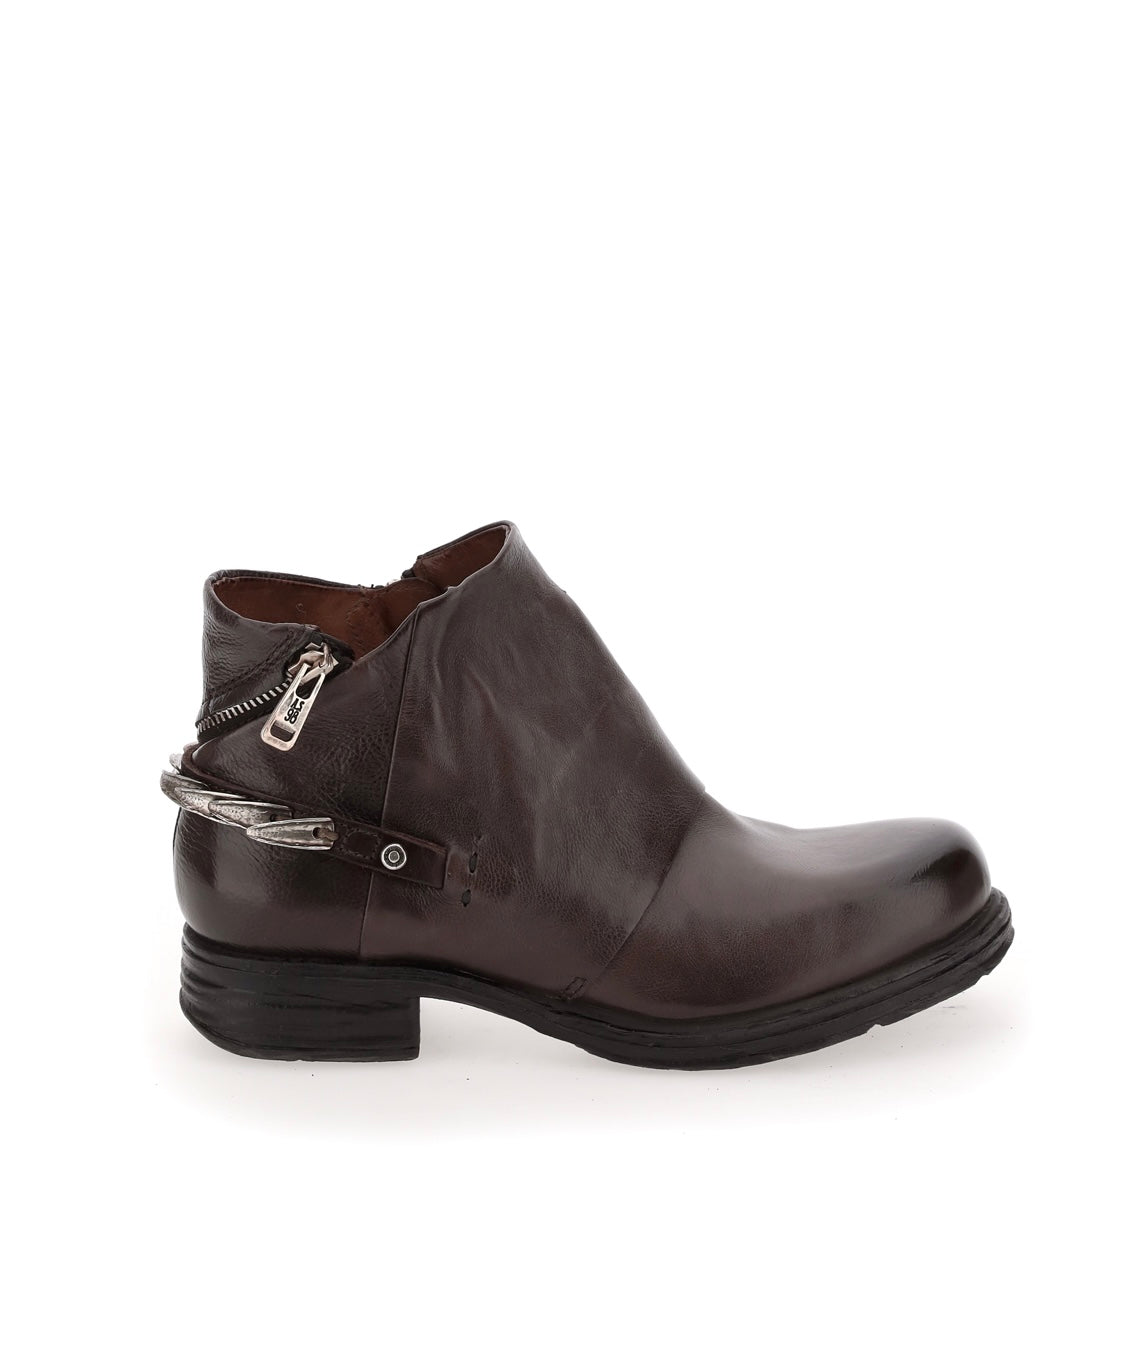 AS98 Ankle Boot - Brown